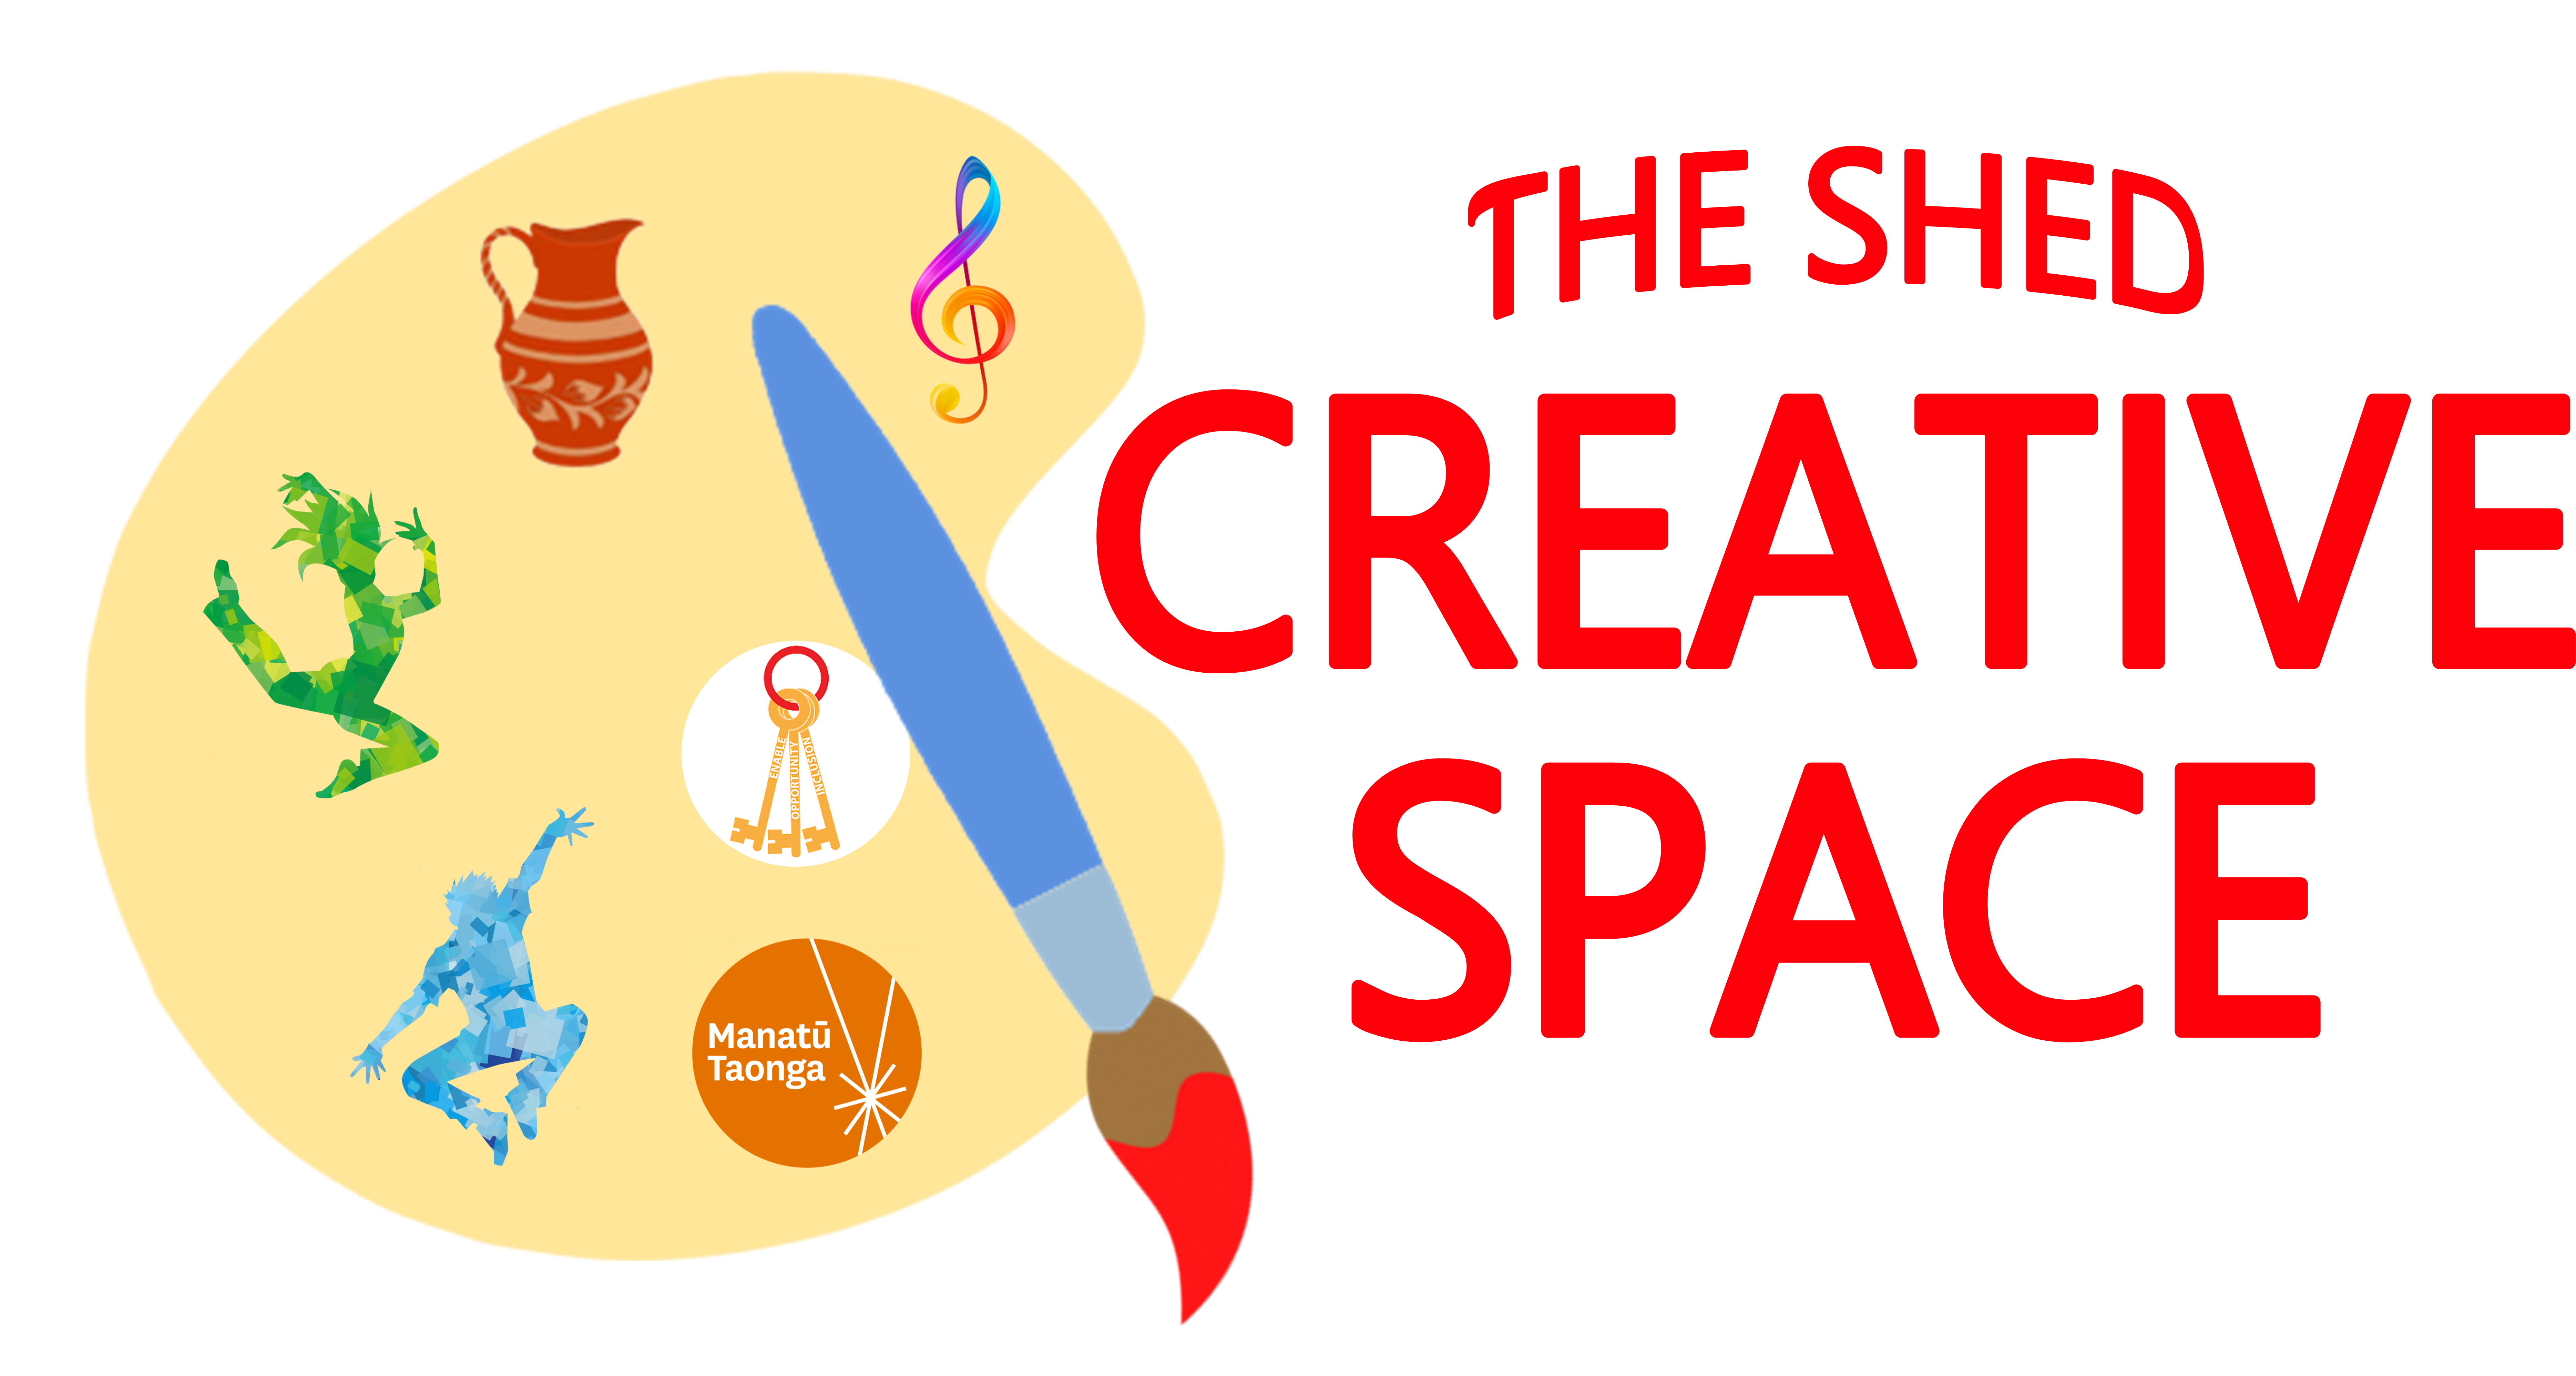 The Shed Creative Space logo